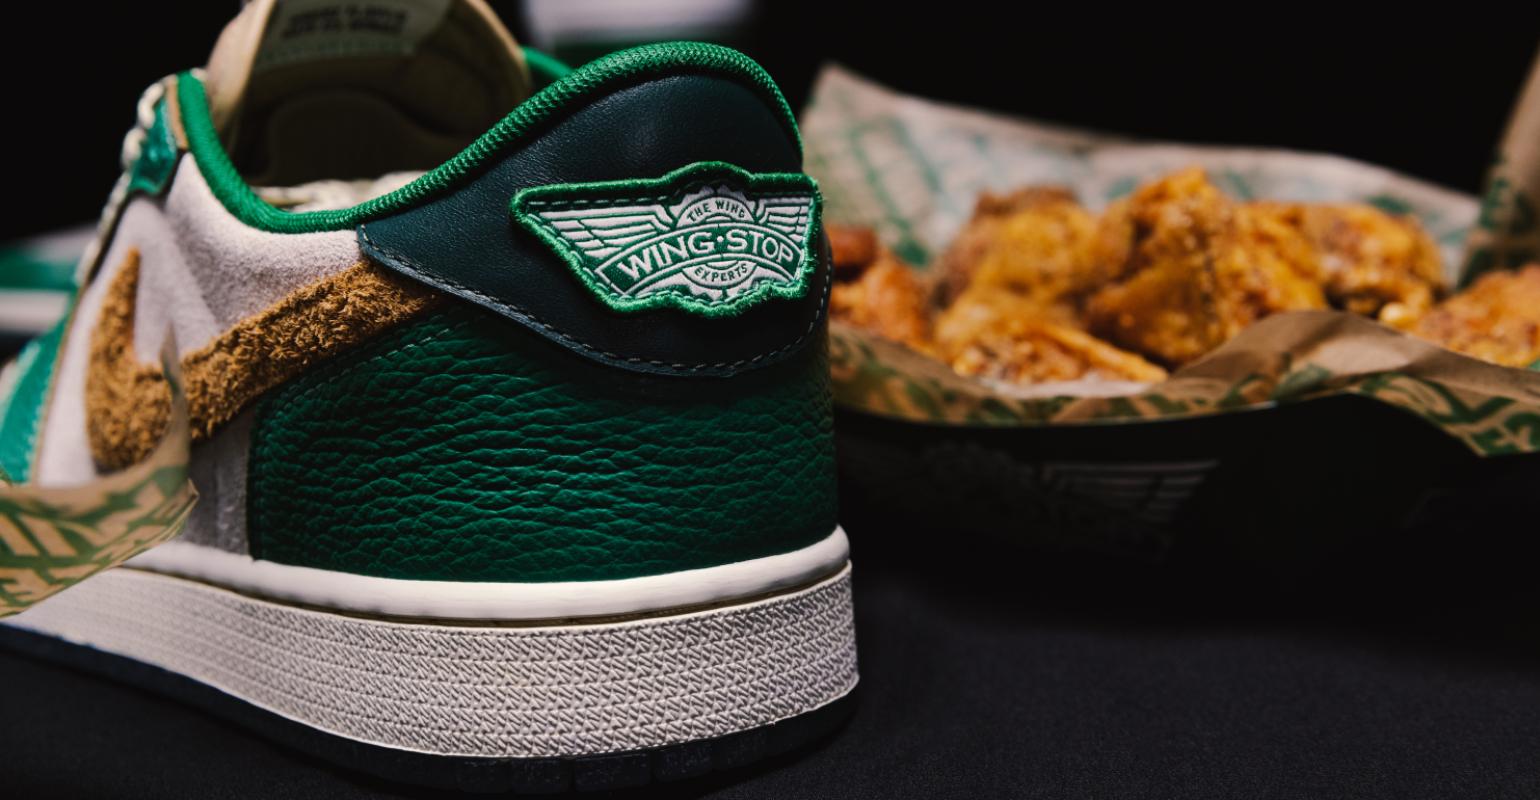 Wingstop to expand social footprint with limited edition shoes